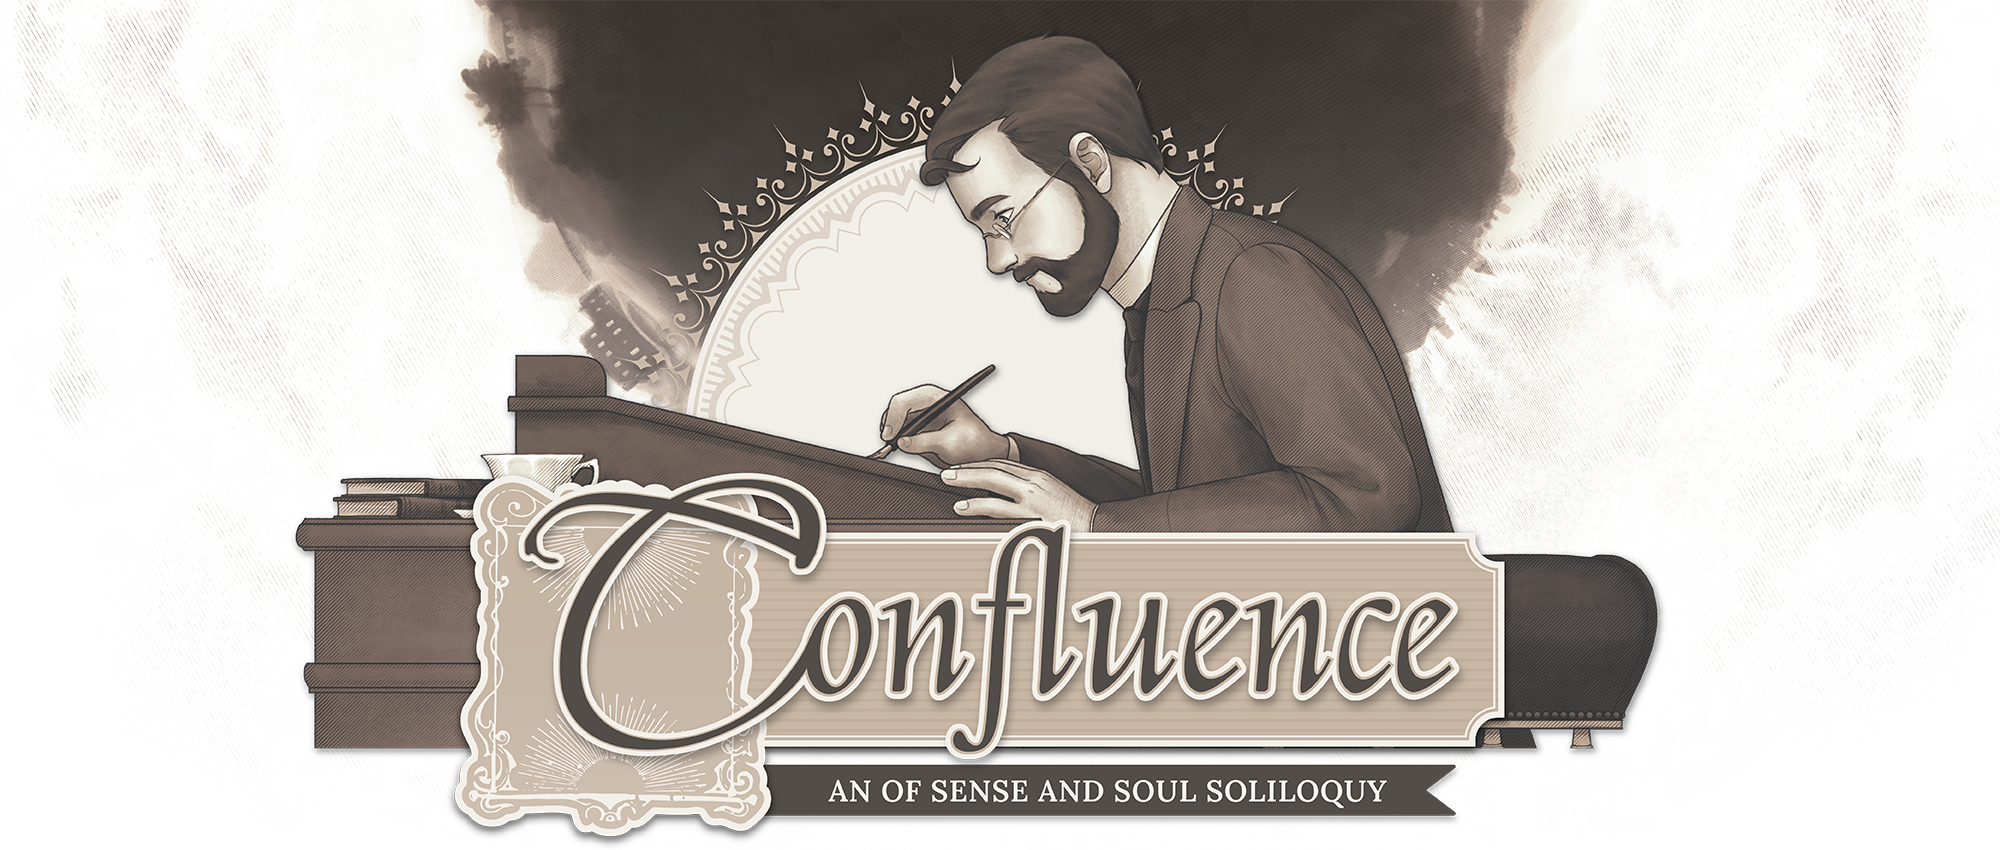 Confluence: An Of Sense and Soul Soliloquy